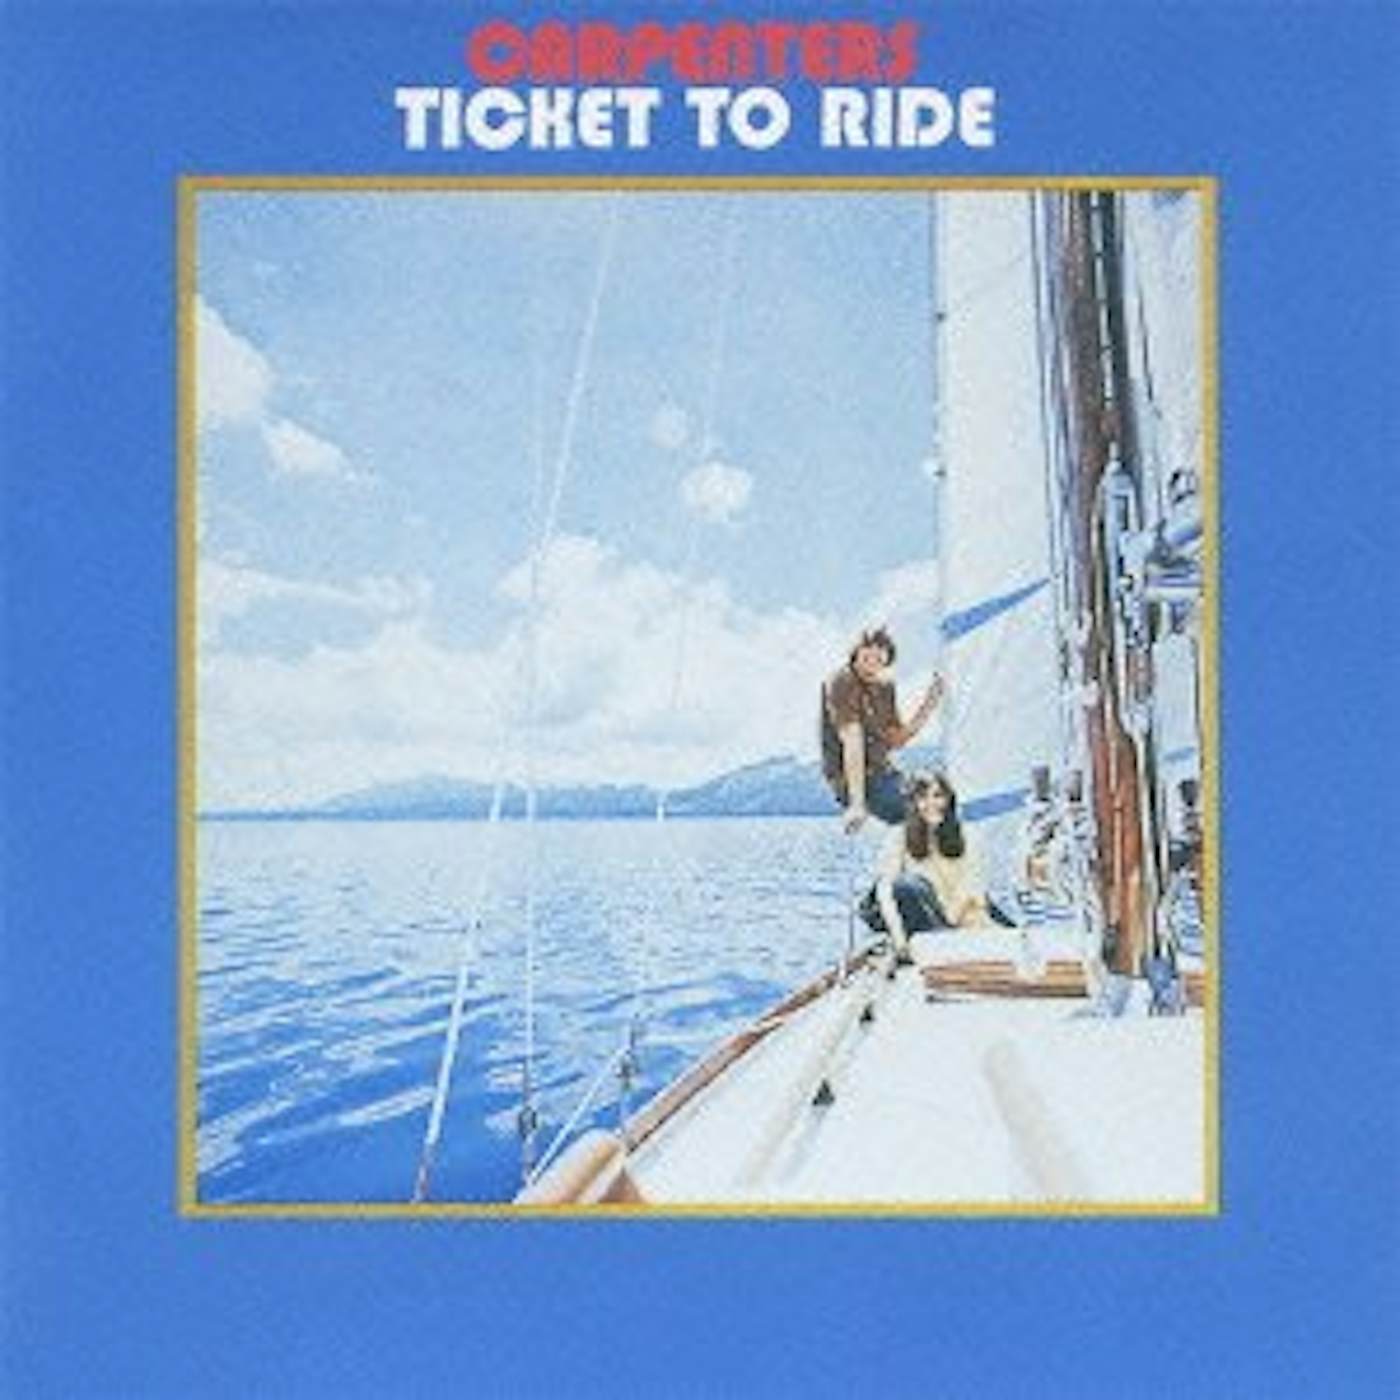 Carpenters TICKET TO RIDE CD